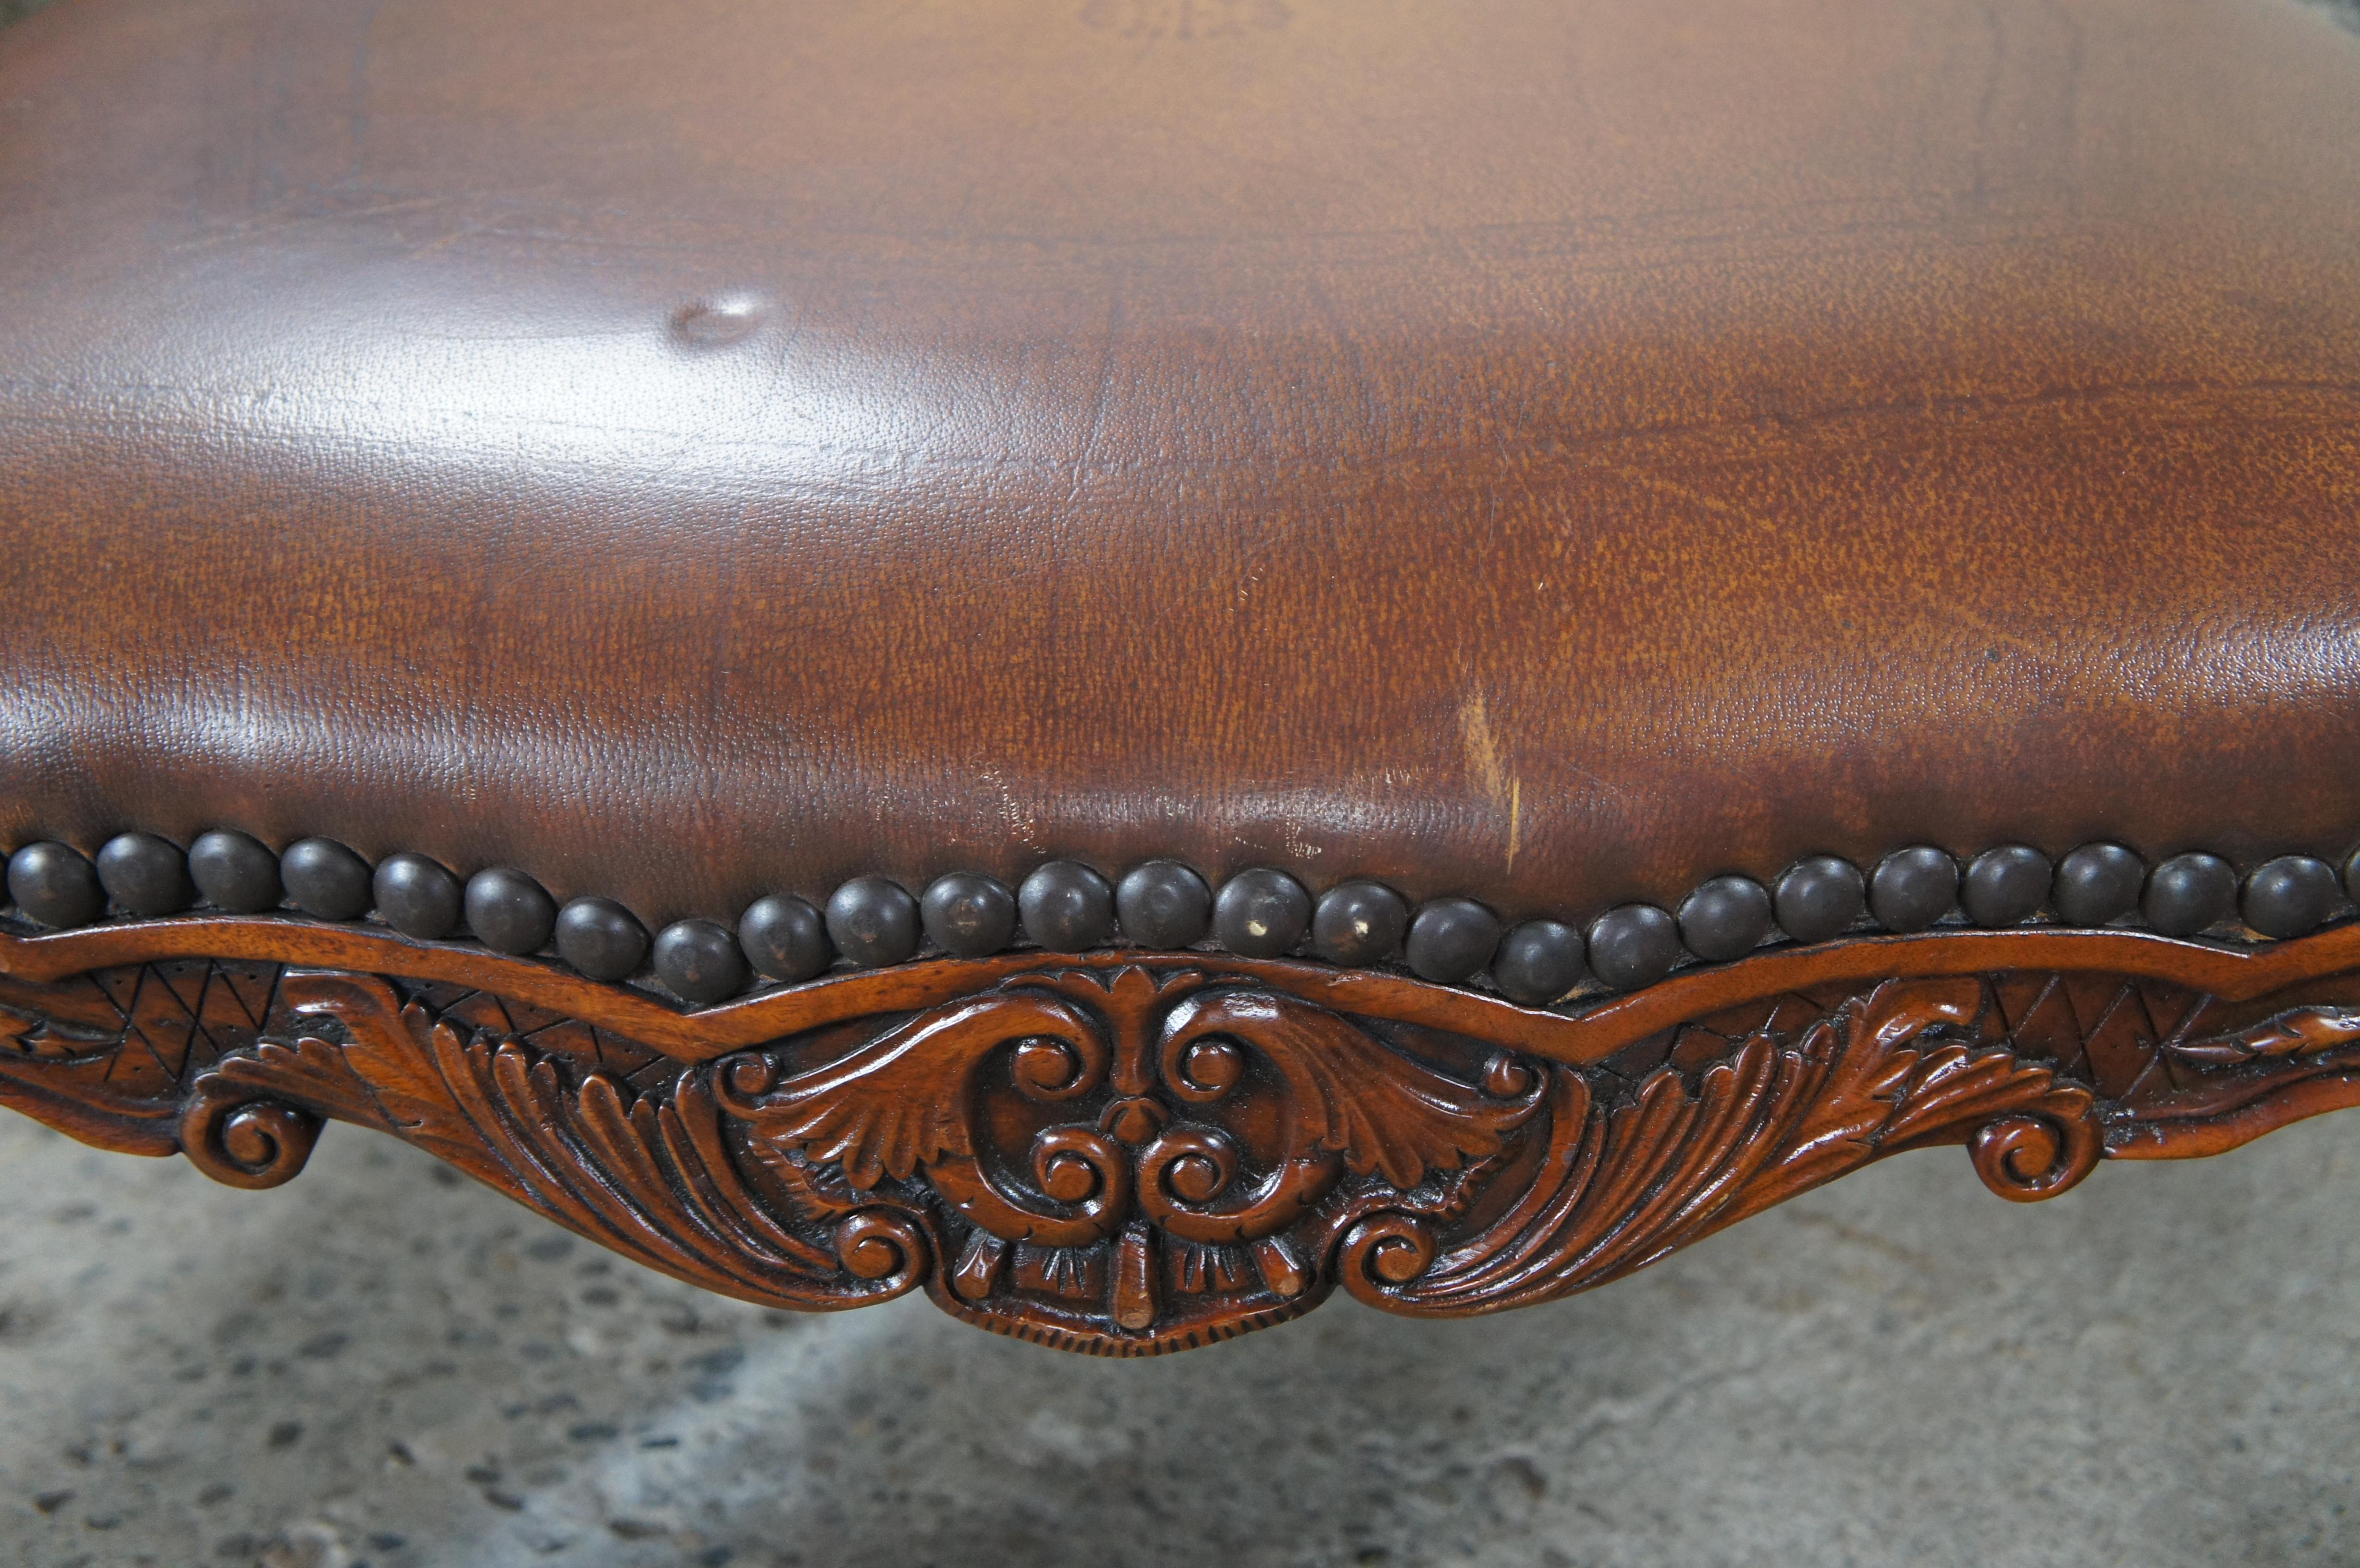 2 Vintage Theodore Alexander French Carved Mahogany Leather Ottomans Foot Stools In Good Condition For Sale In Dayton, OH